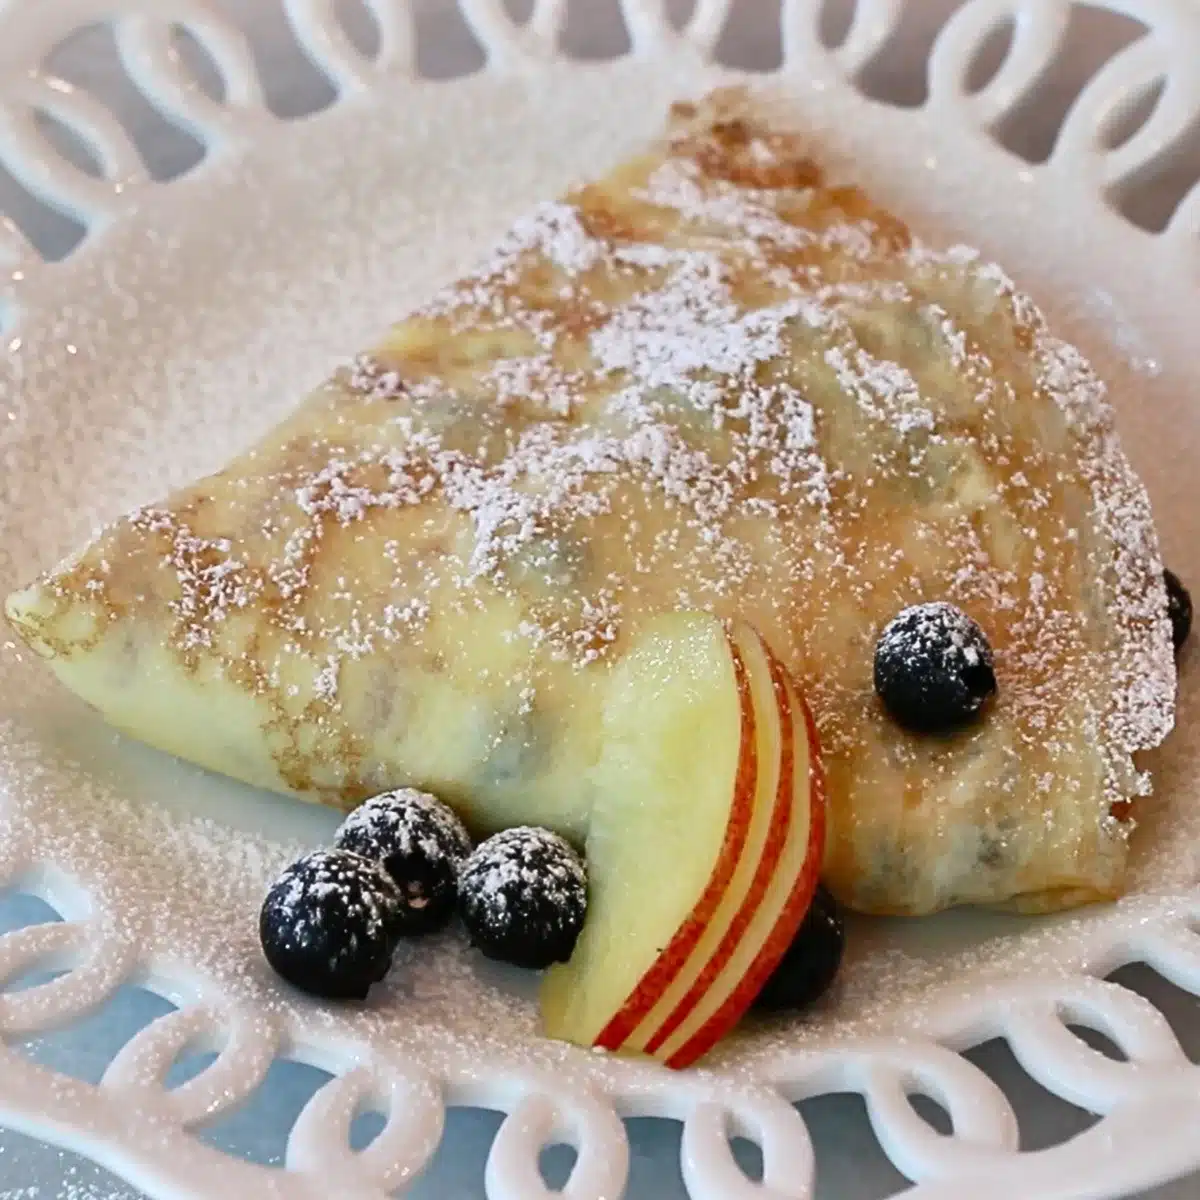 crepe filled with whipped cream, yogurt, blueberries, and peach